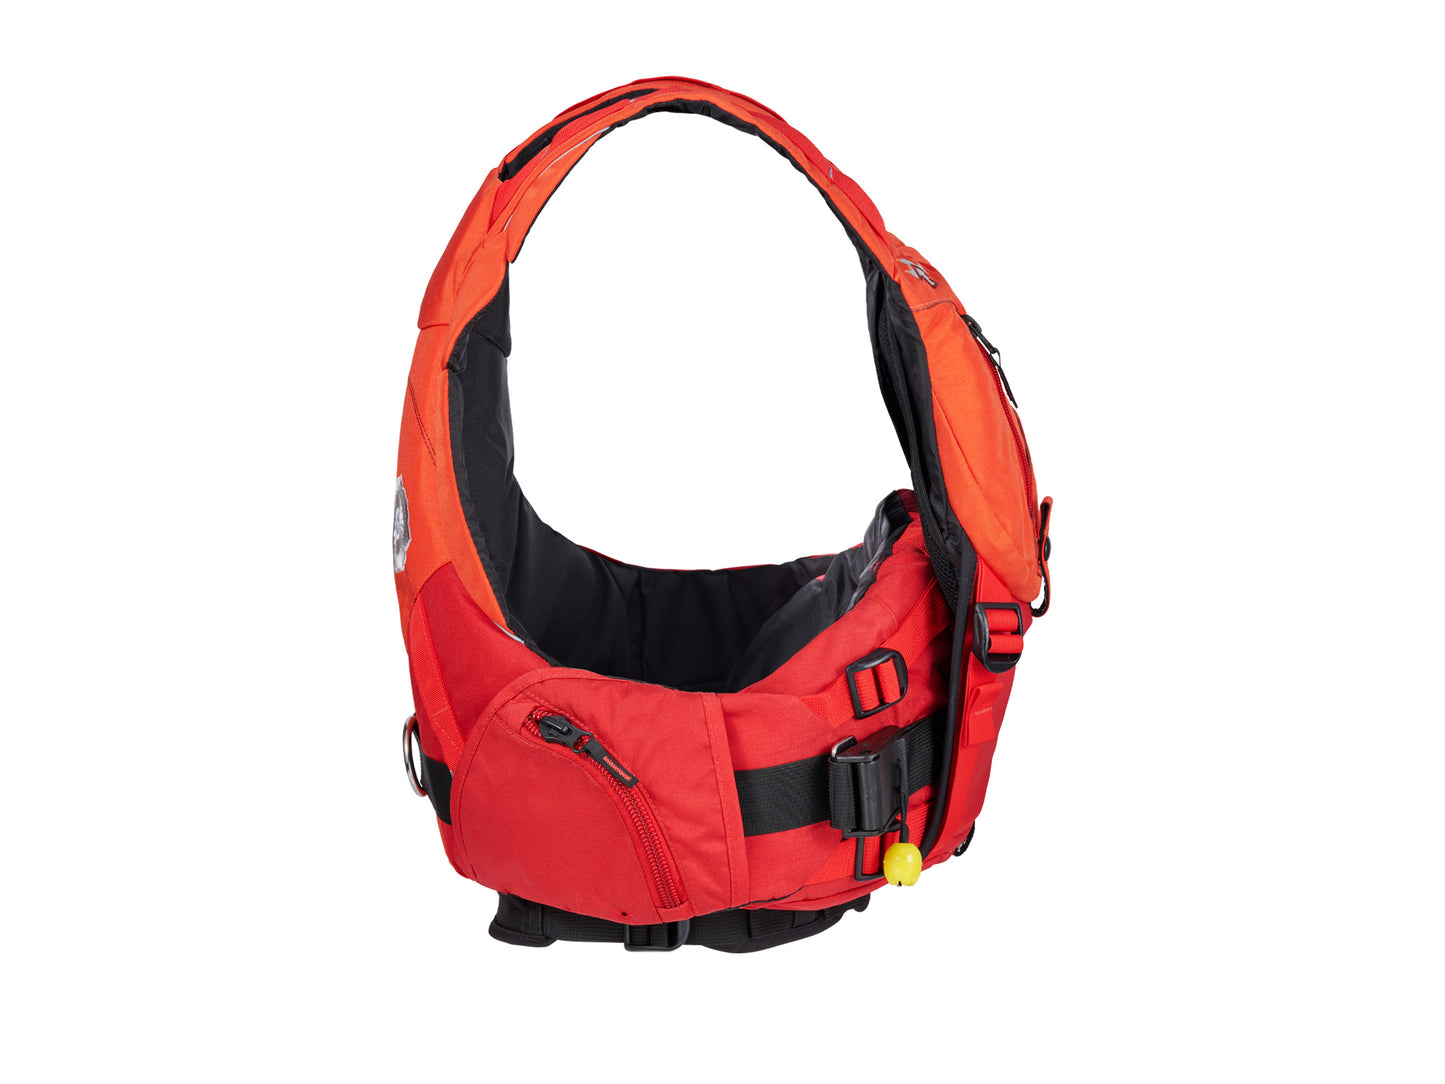 A red and black Indus High Float Rescue PFD from Astral on a white background.